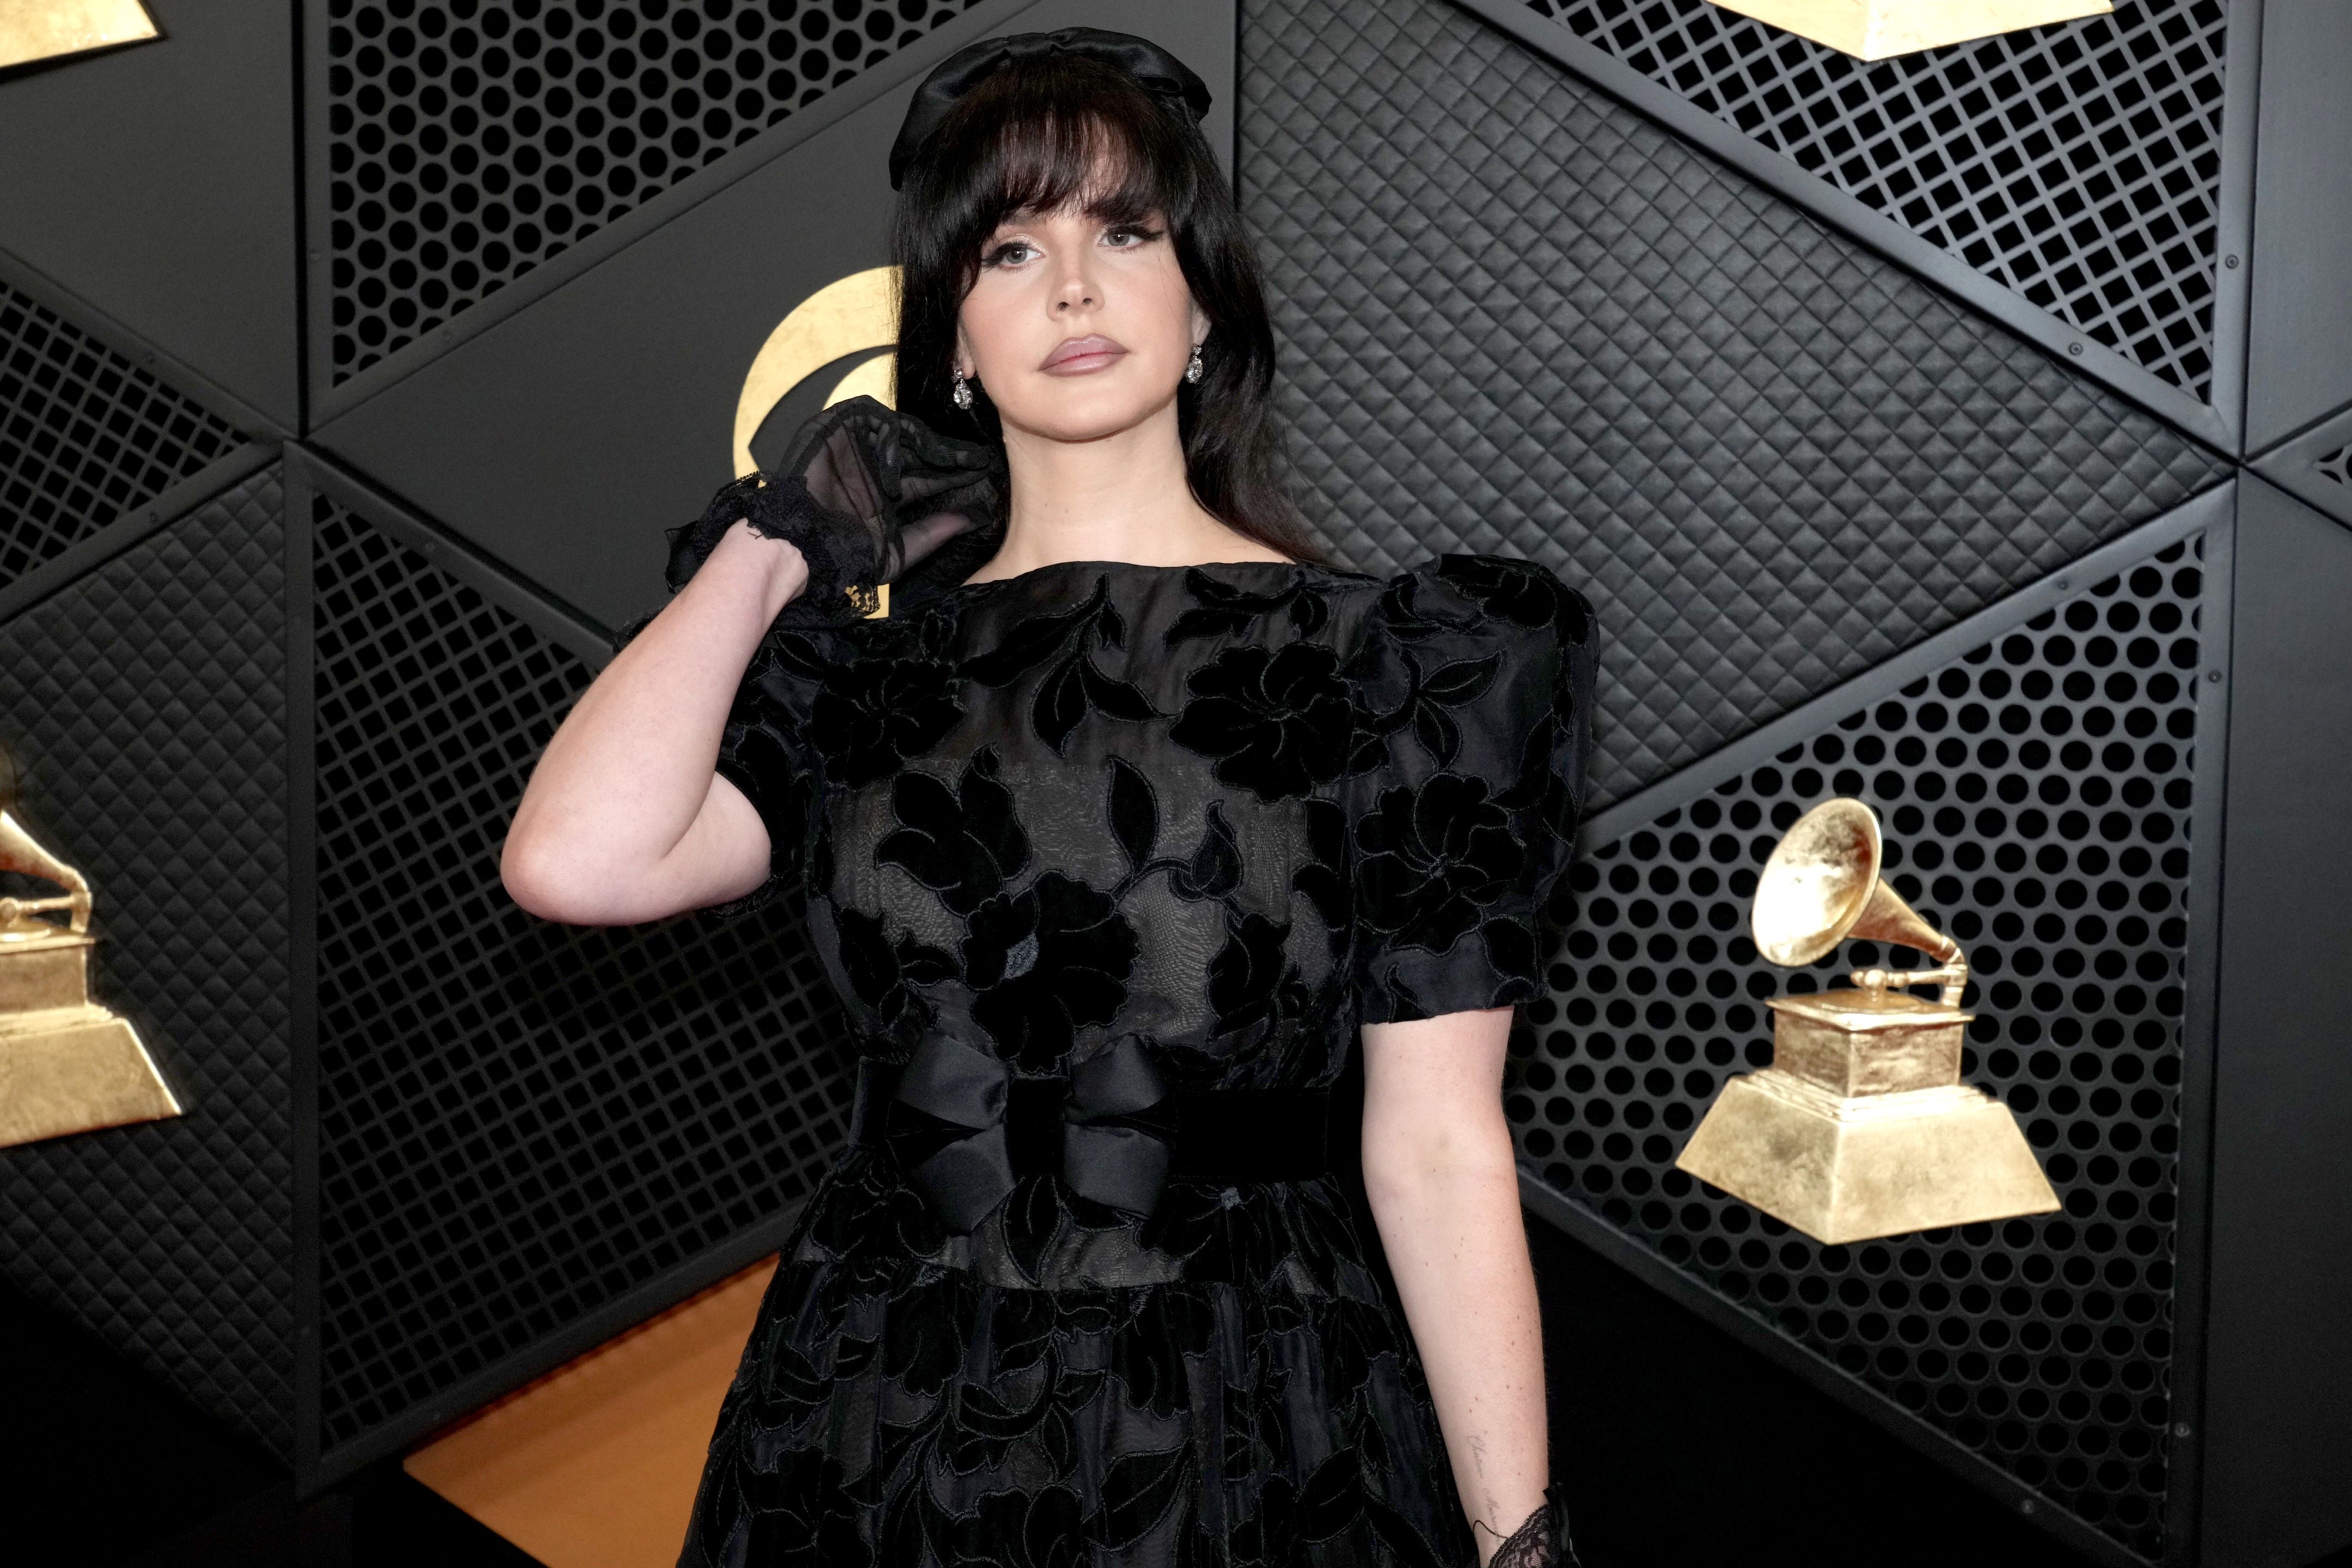 https://hips.hearstapps.com/hmg-prod/images/lana-del-rey-attends-the-66th-grammy-awards-at-crypto-com-news-photo-1707394190.jpg